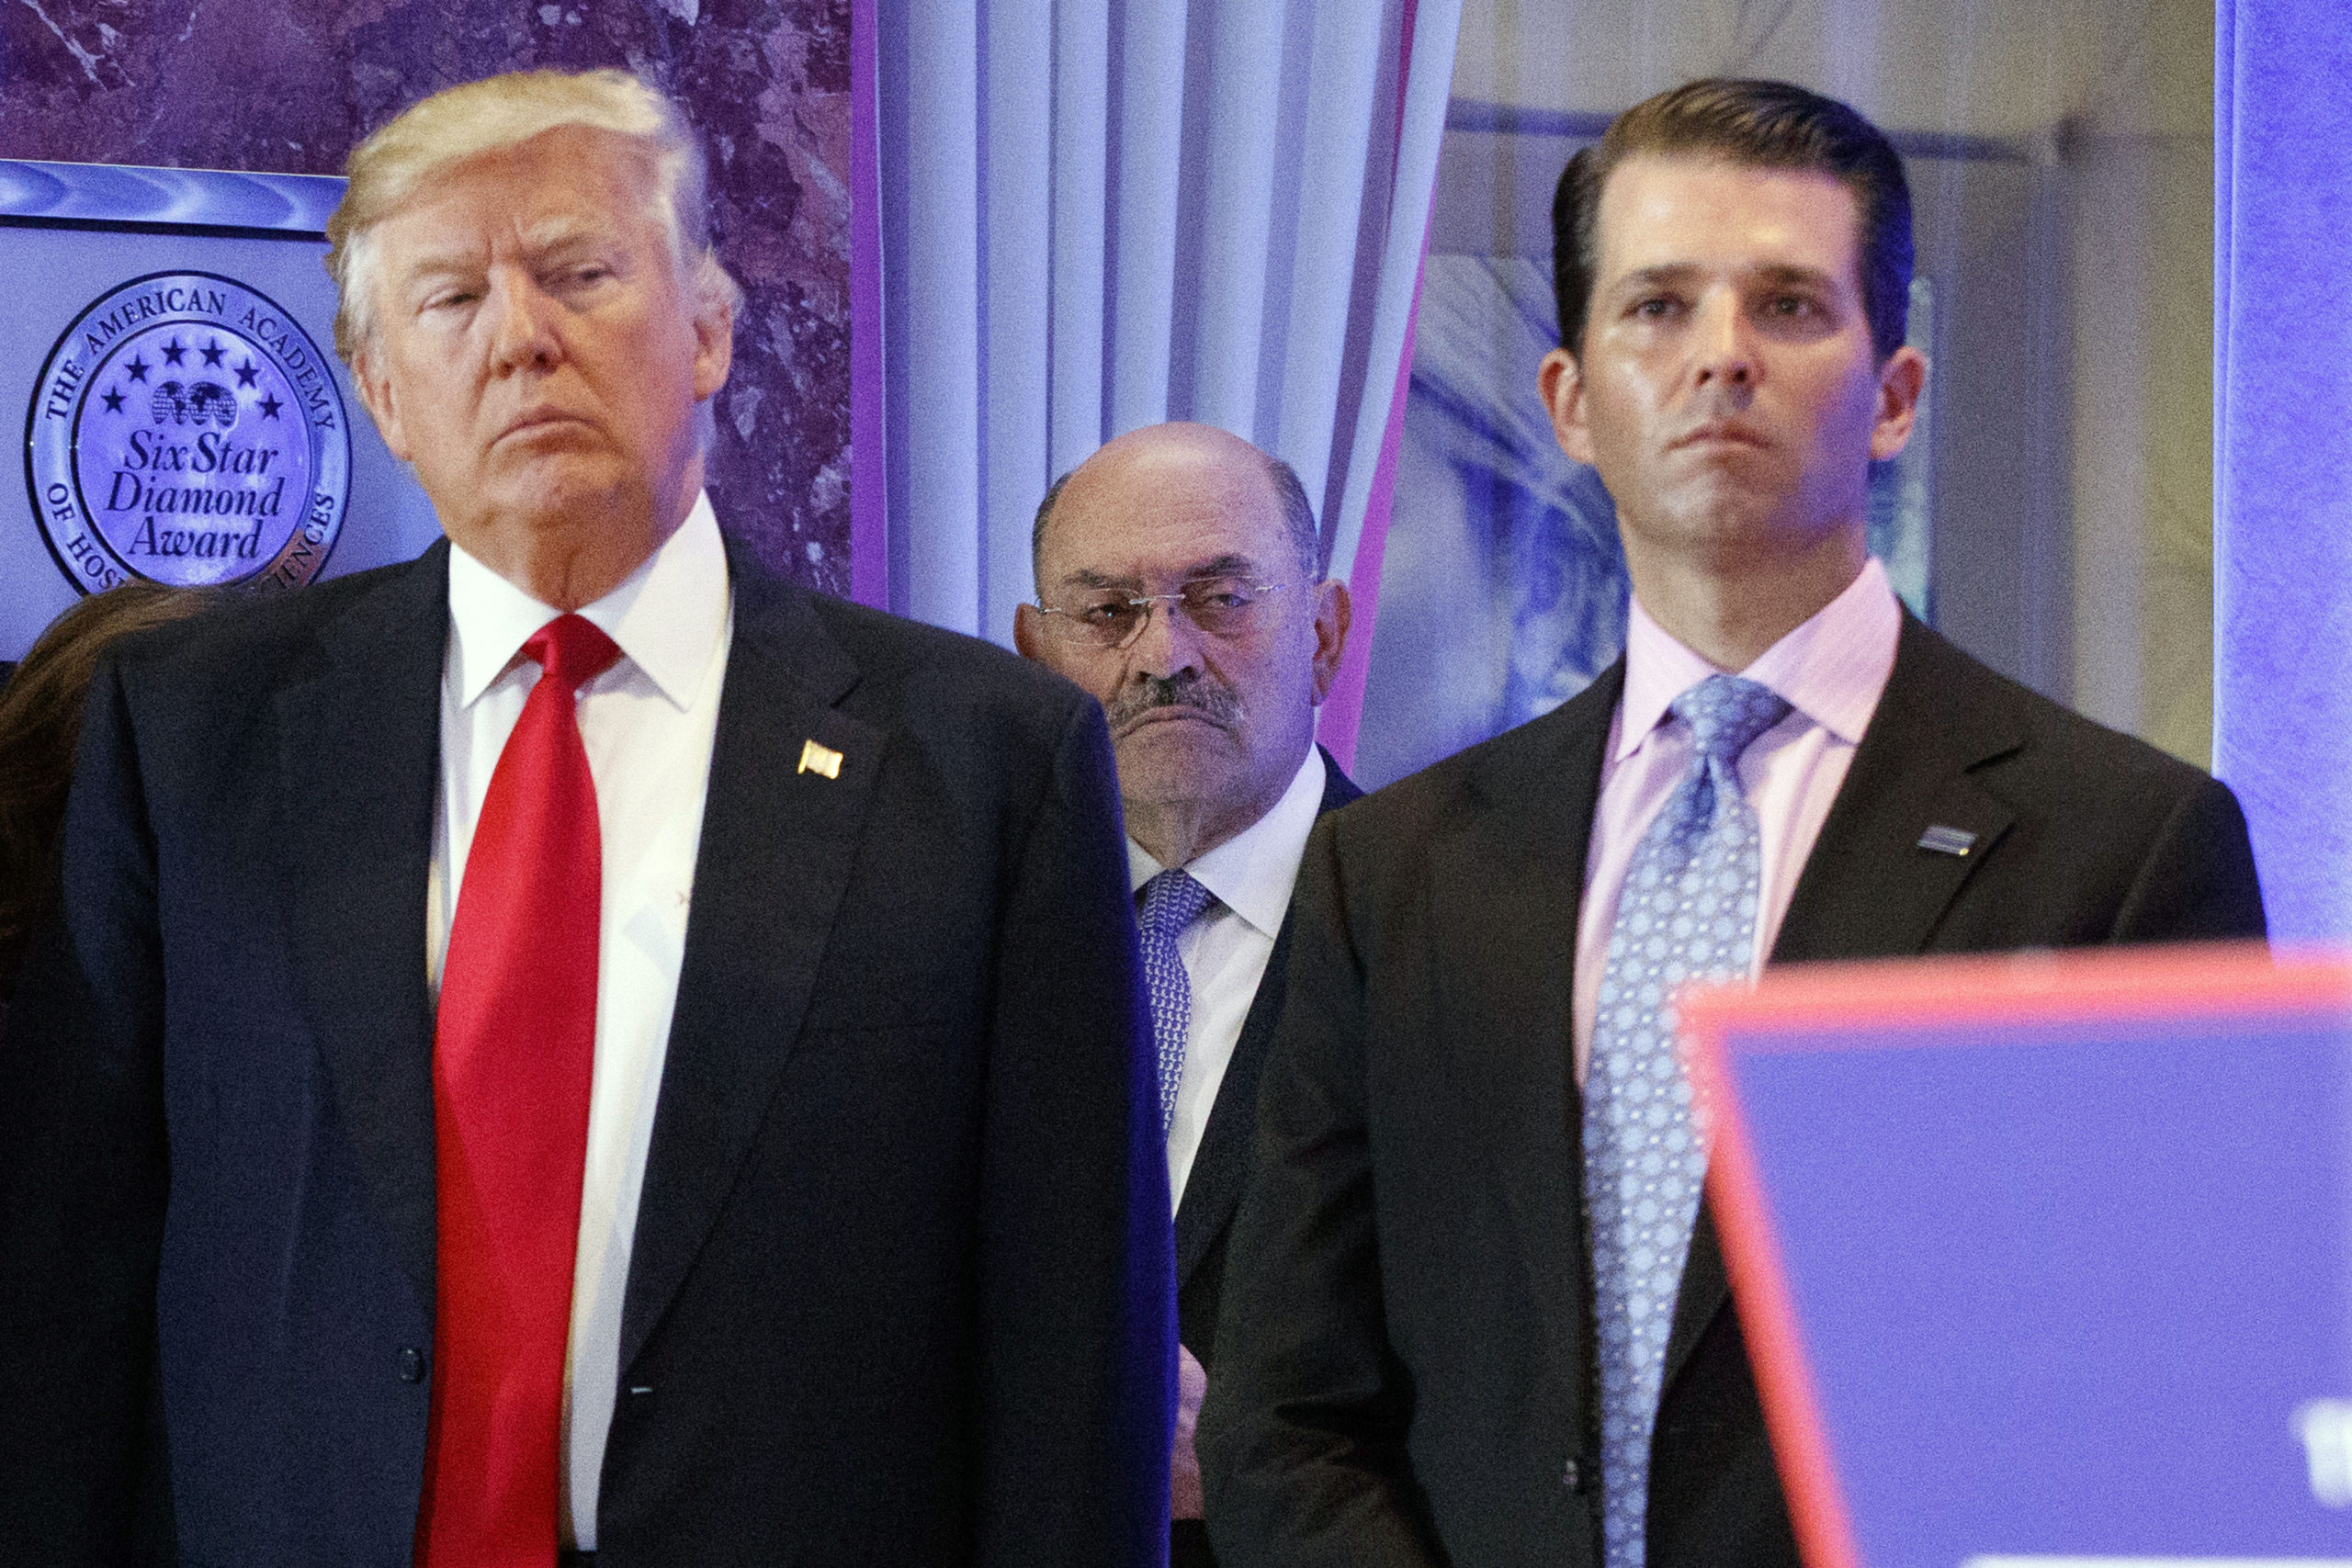 Allen Weisselberg, flanked by Donald Trump and Donald Trump Jr.